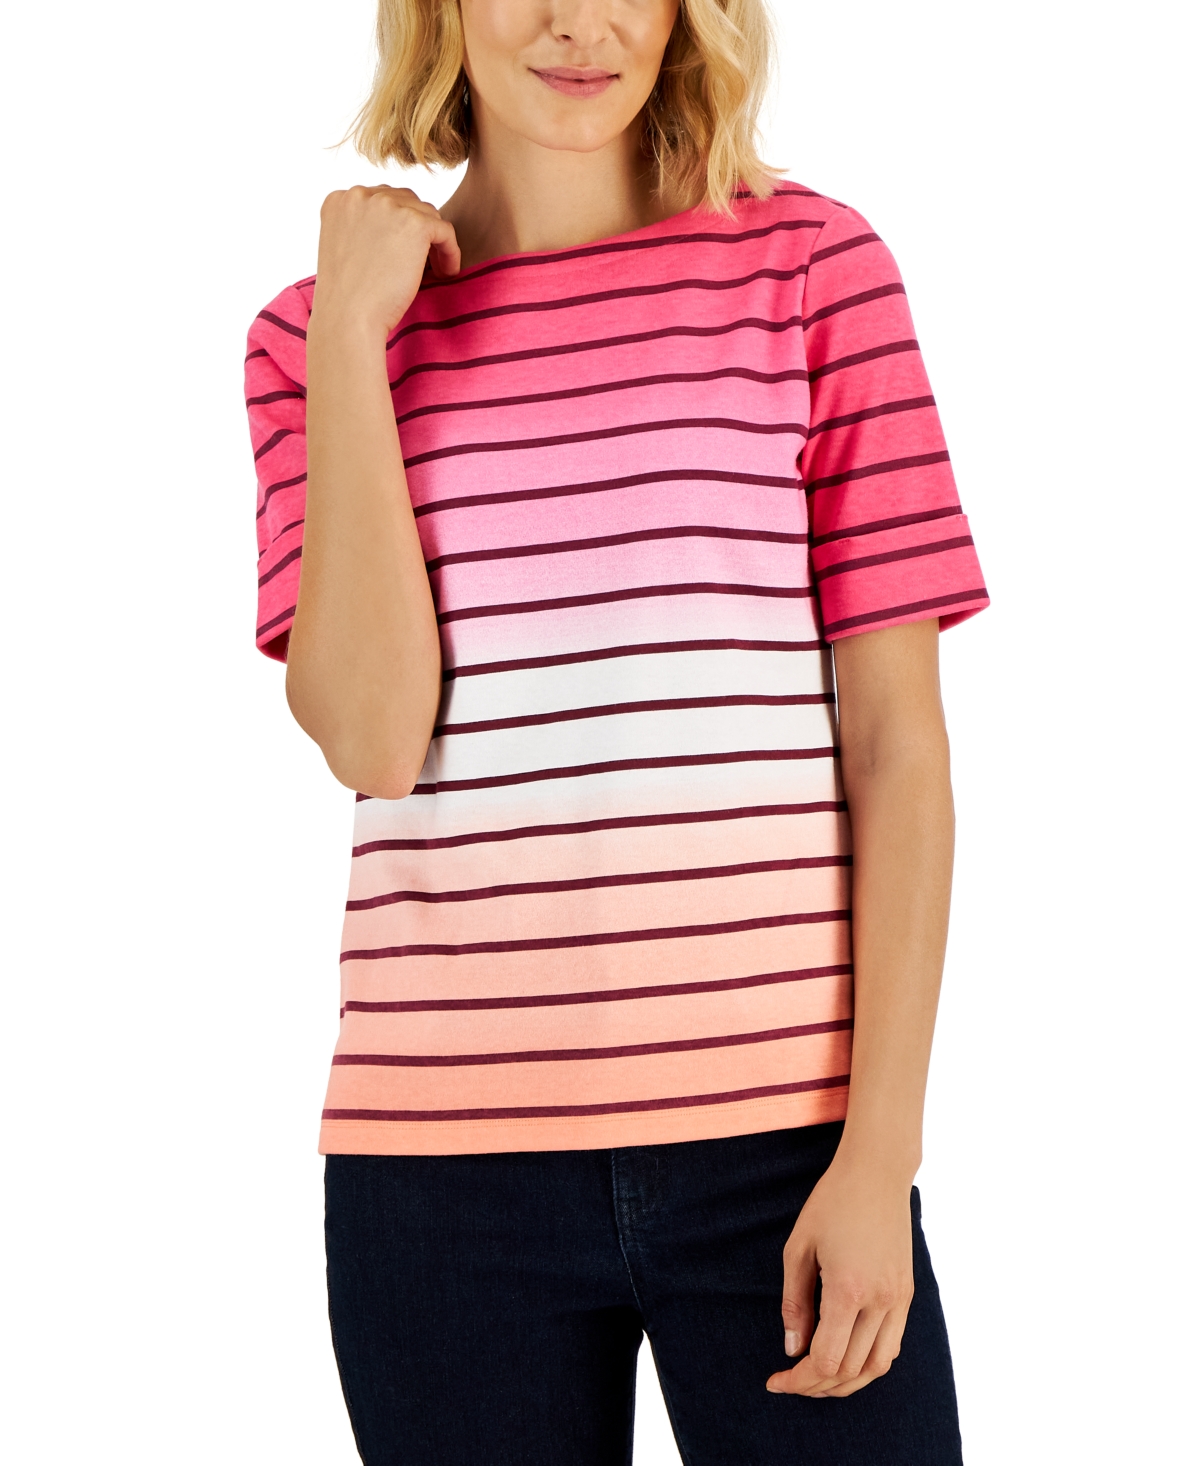 Women's Striped Ombre Short-Sleeve Top, Created for Macy's - Steel Rose